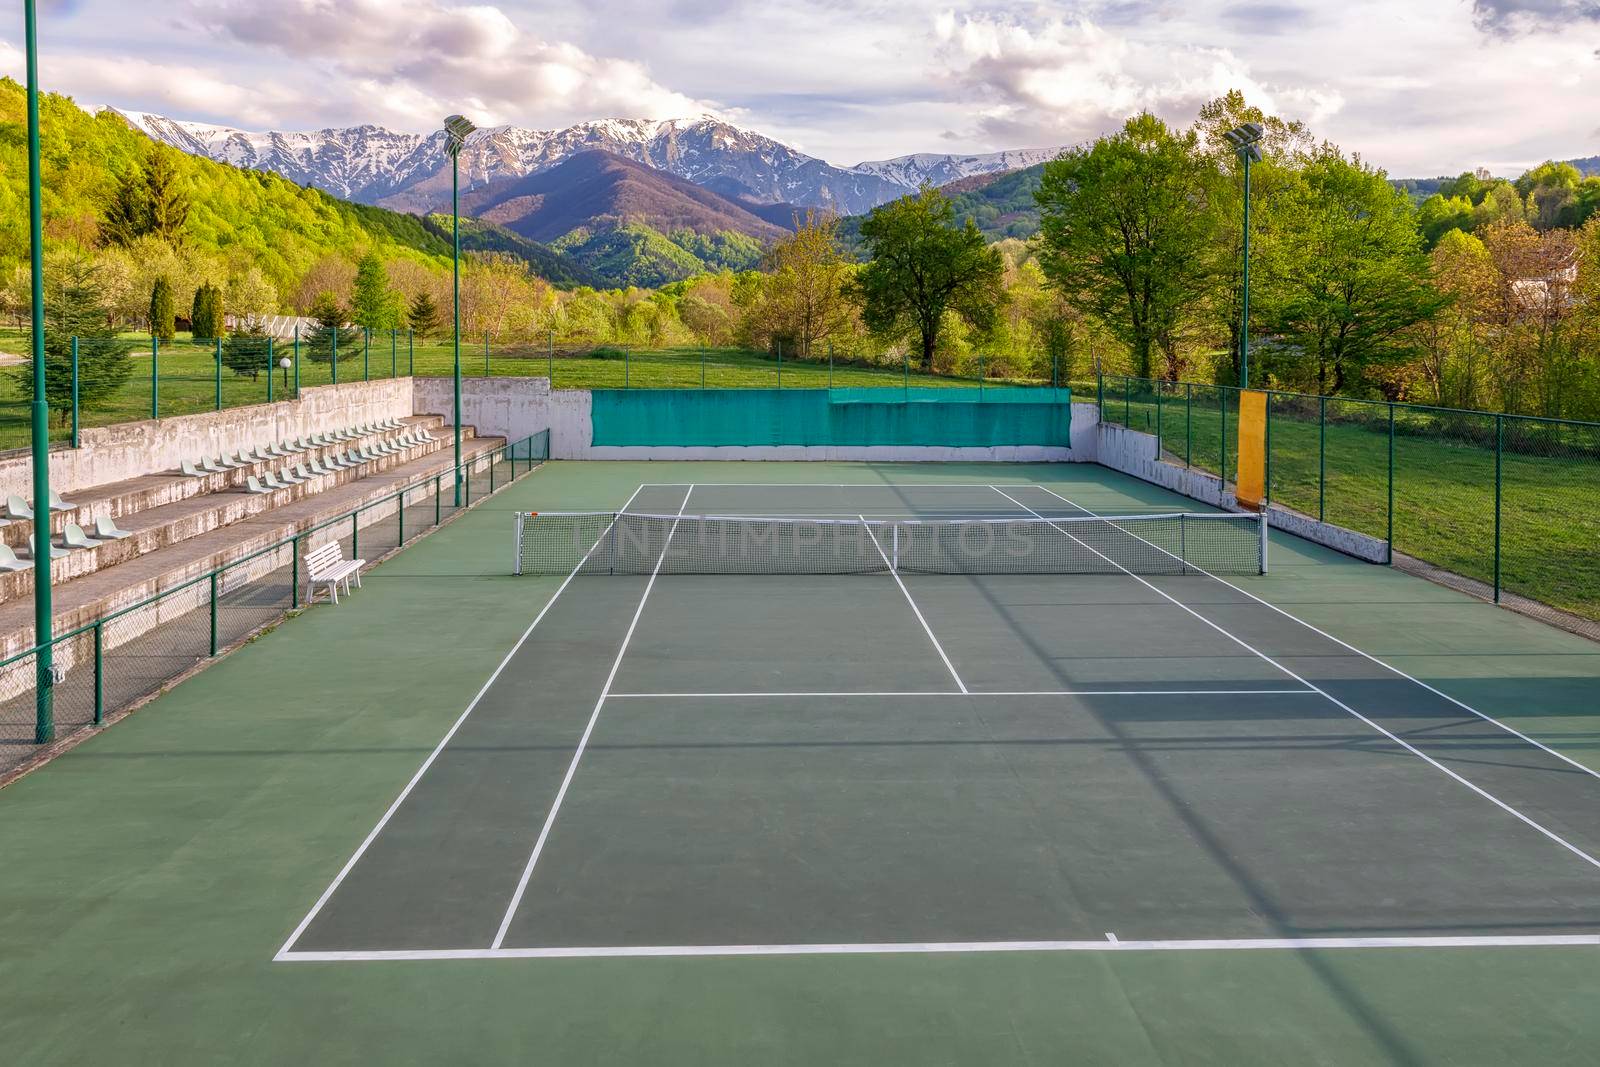 Tennis court. Trees and mountains around the tennis court in nature. by EdVal